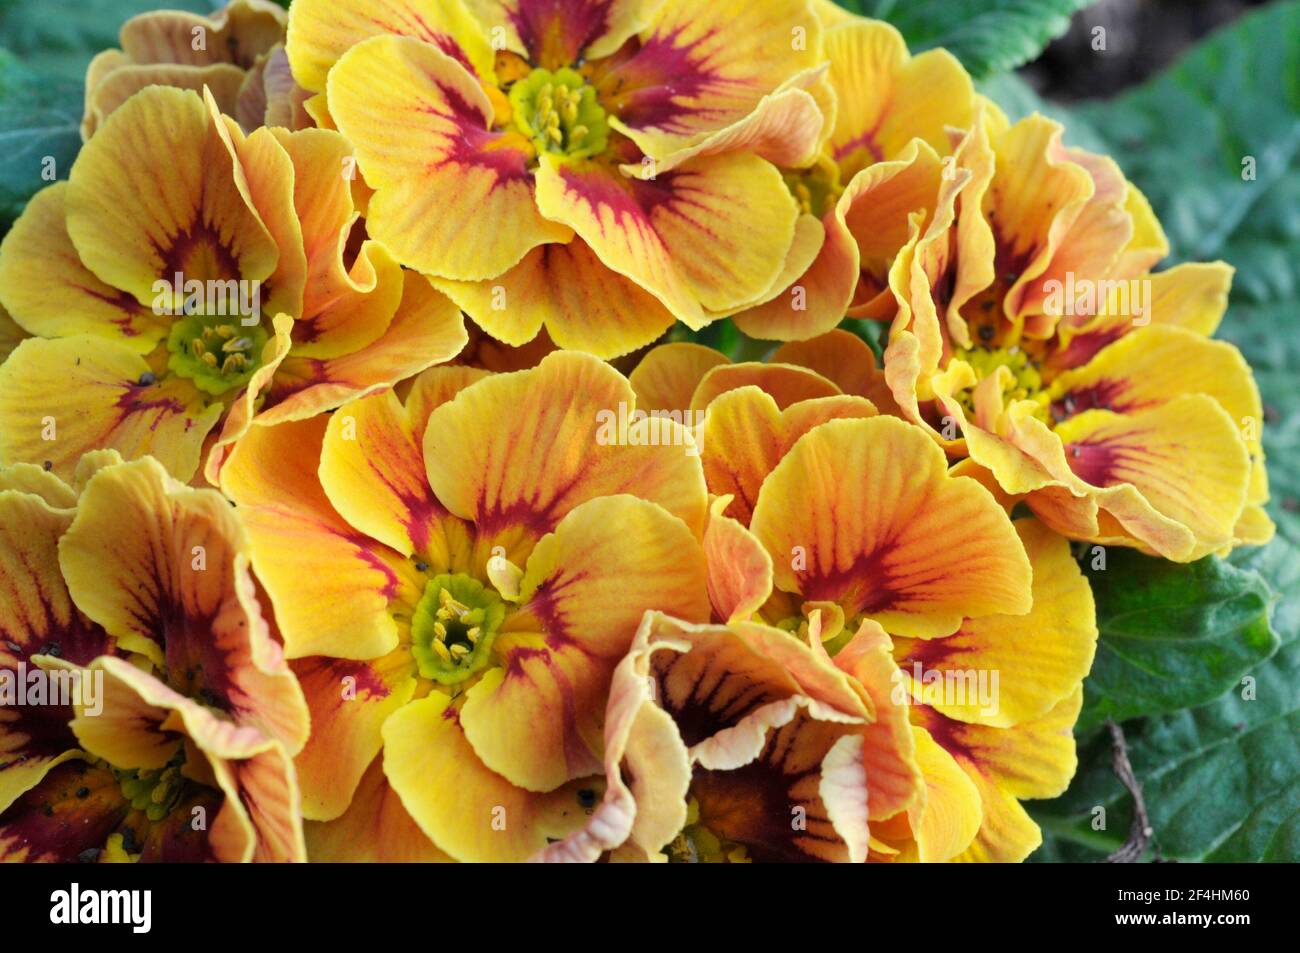 Close up of primula vulgaris Marietta a bi colour rosette F1 Polyanthus that is a yellow and red spring flowering semi evergreen hardy perennial Stock Photo